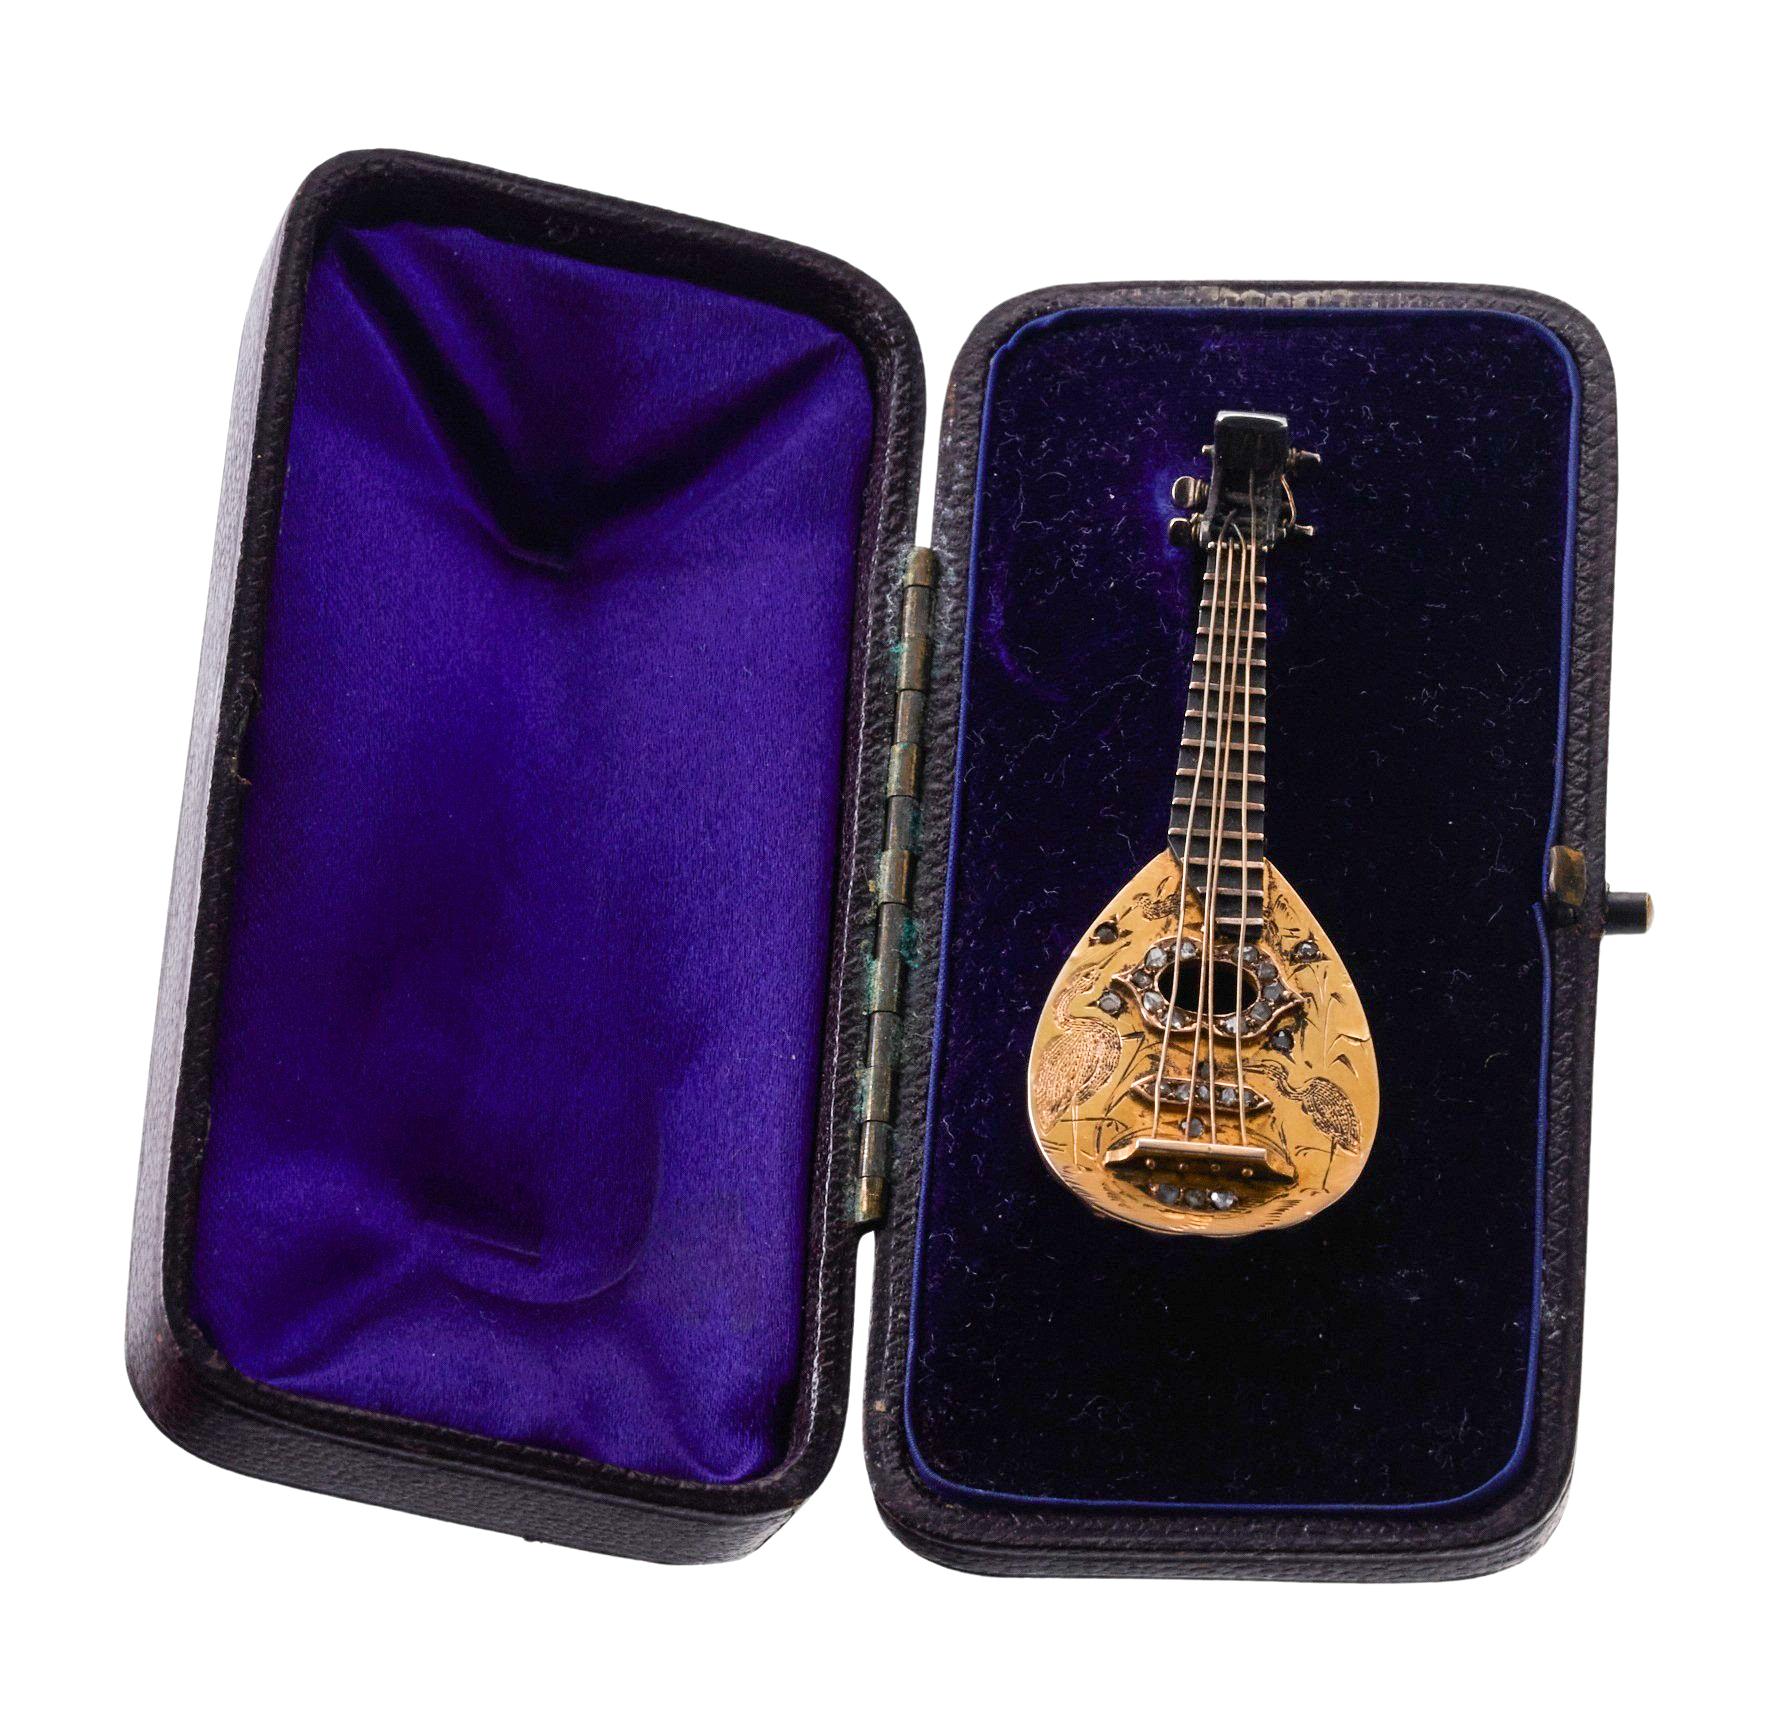 Antique 14k gold and silver mandolin brooch, adorned with rose cut diamonds. Brooch comes in original antique fitted box. Measures 60mm x 23mm. Tested 14k/Silver. Weight of the piece - 9.7 grams. 